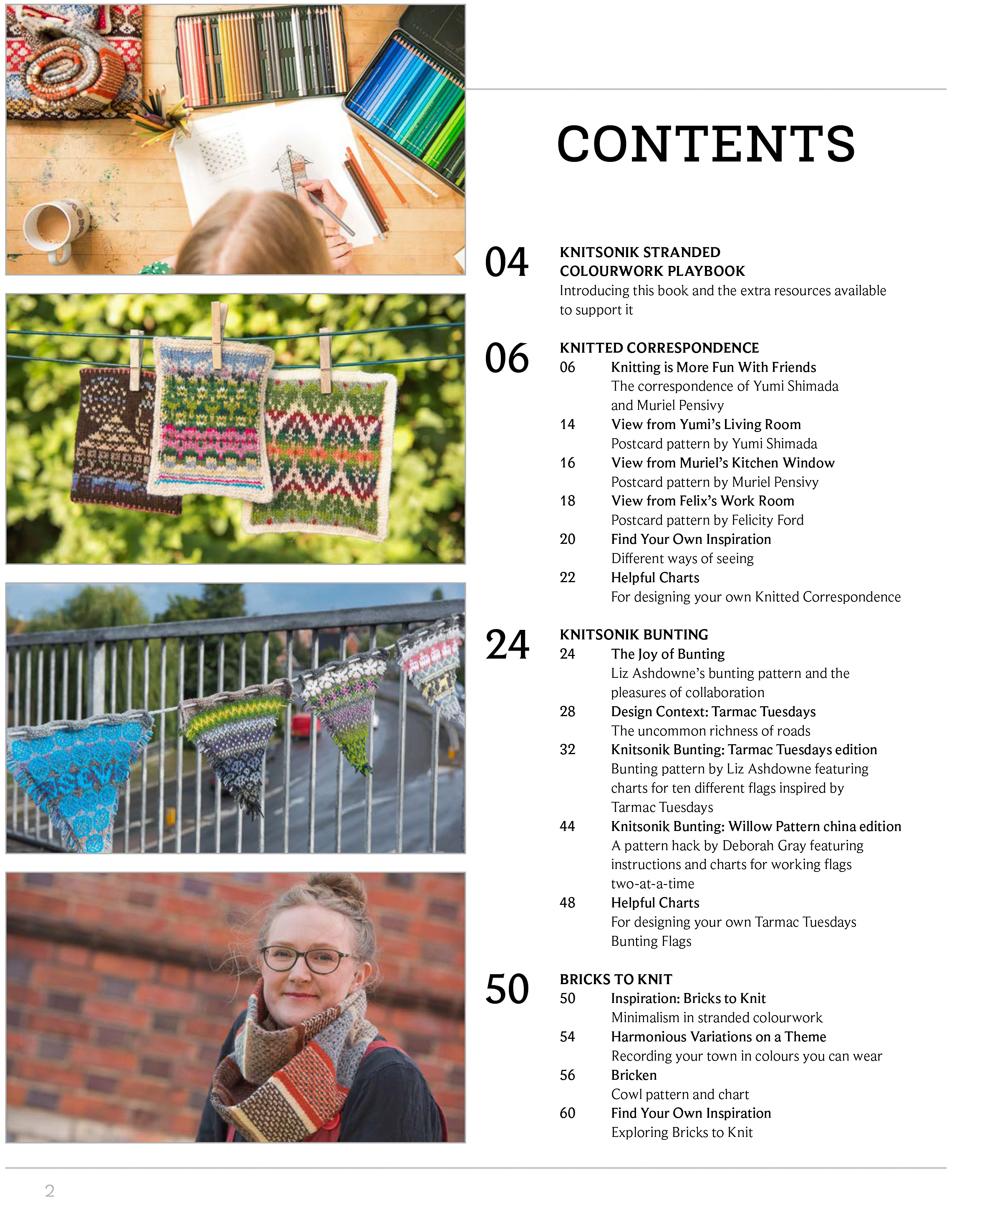 KNITSONIK Stranded Colourwork Playbook contents page